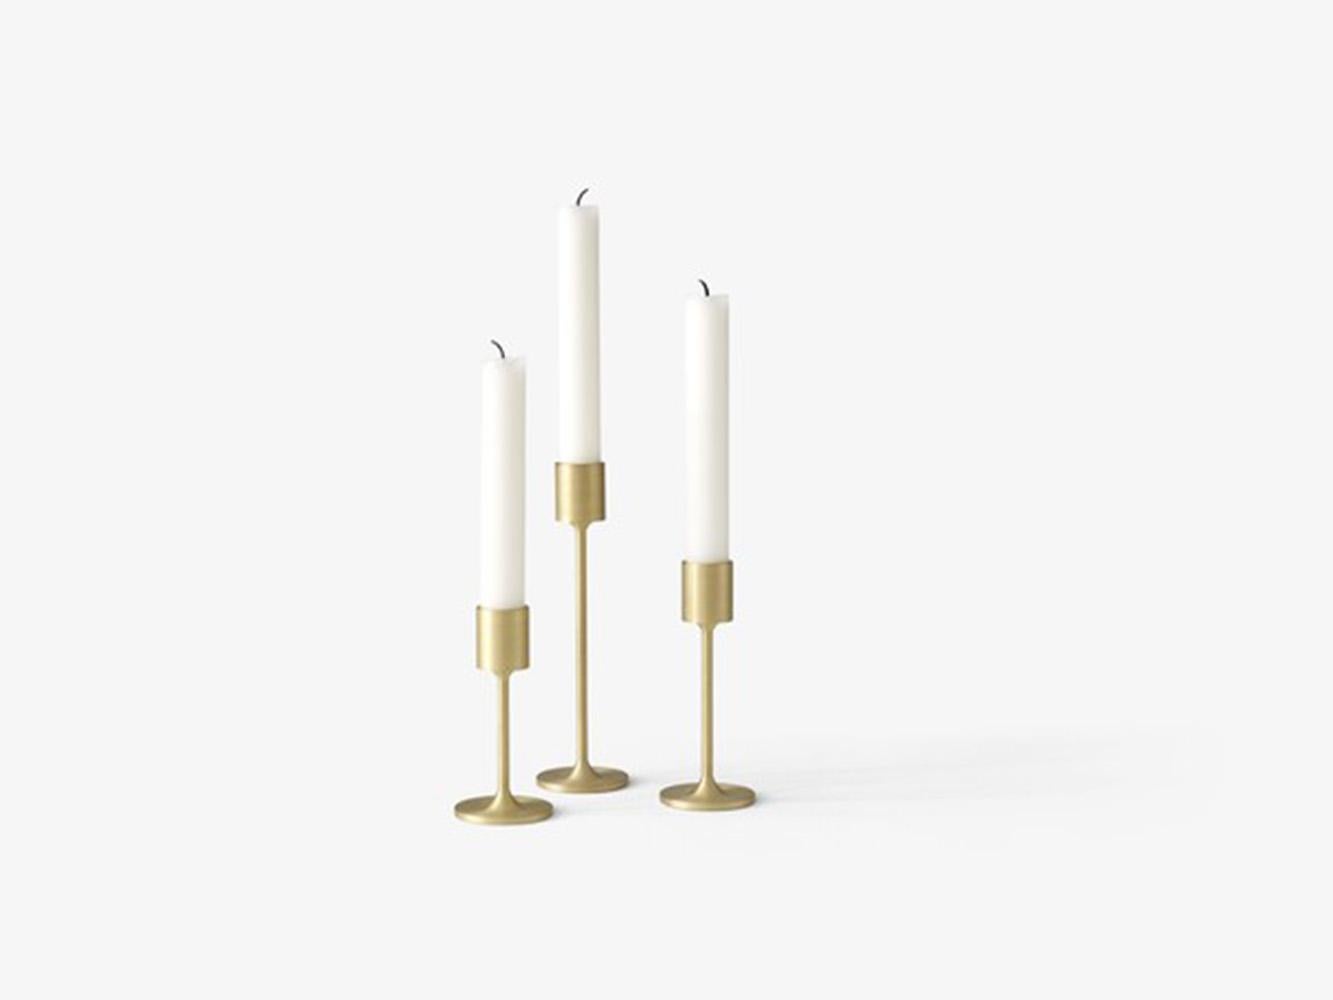 Scandinavian Modern Set of 3 Collect Candle Holders SC57-SC59 by Space Copenhagen for & Tradition For Sale